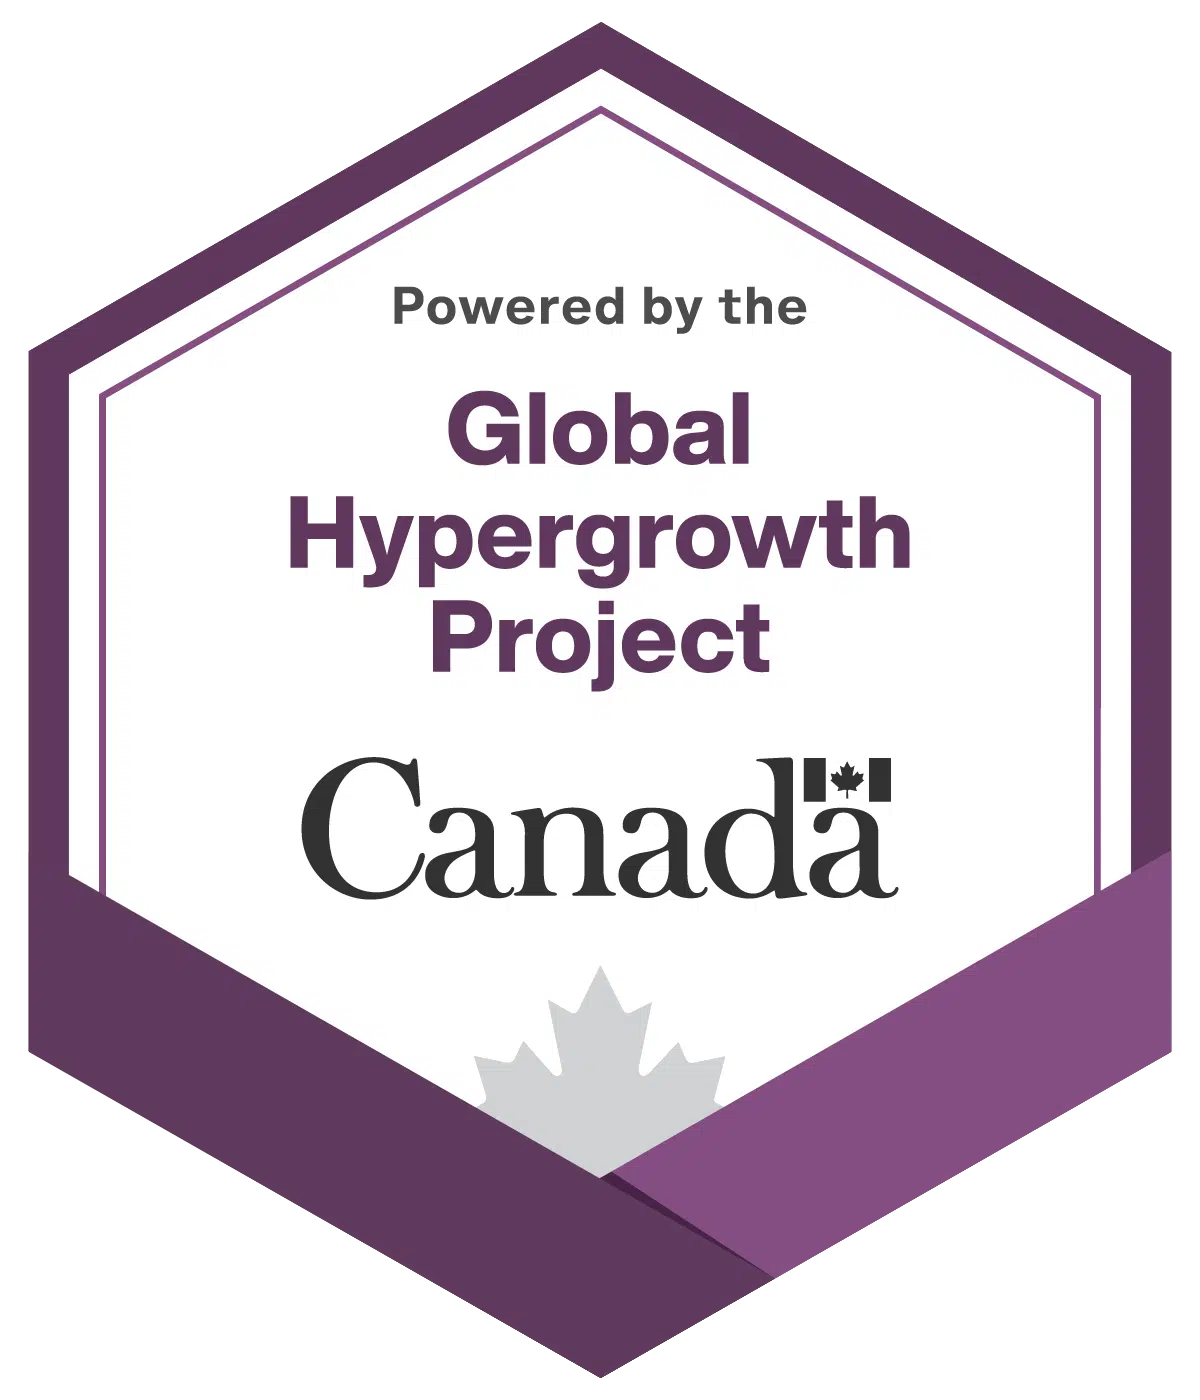 Powered by the Global Hypergrowth Project - Canada